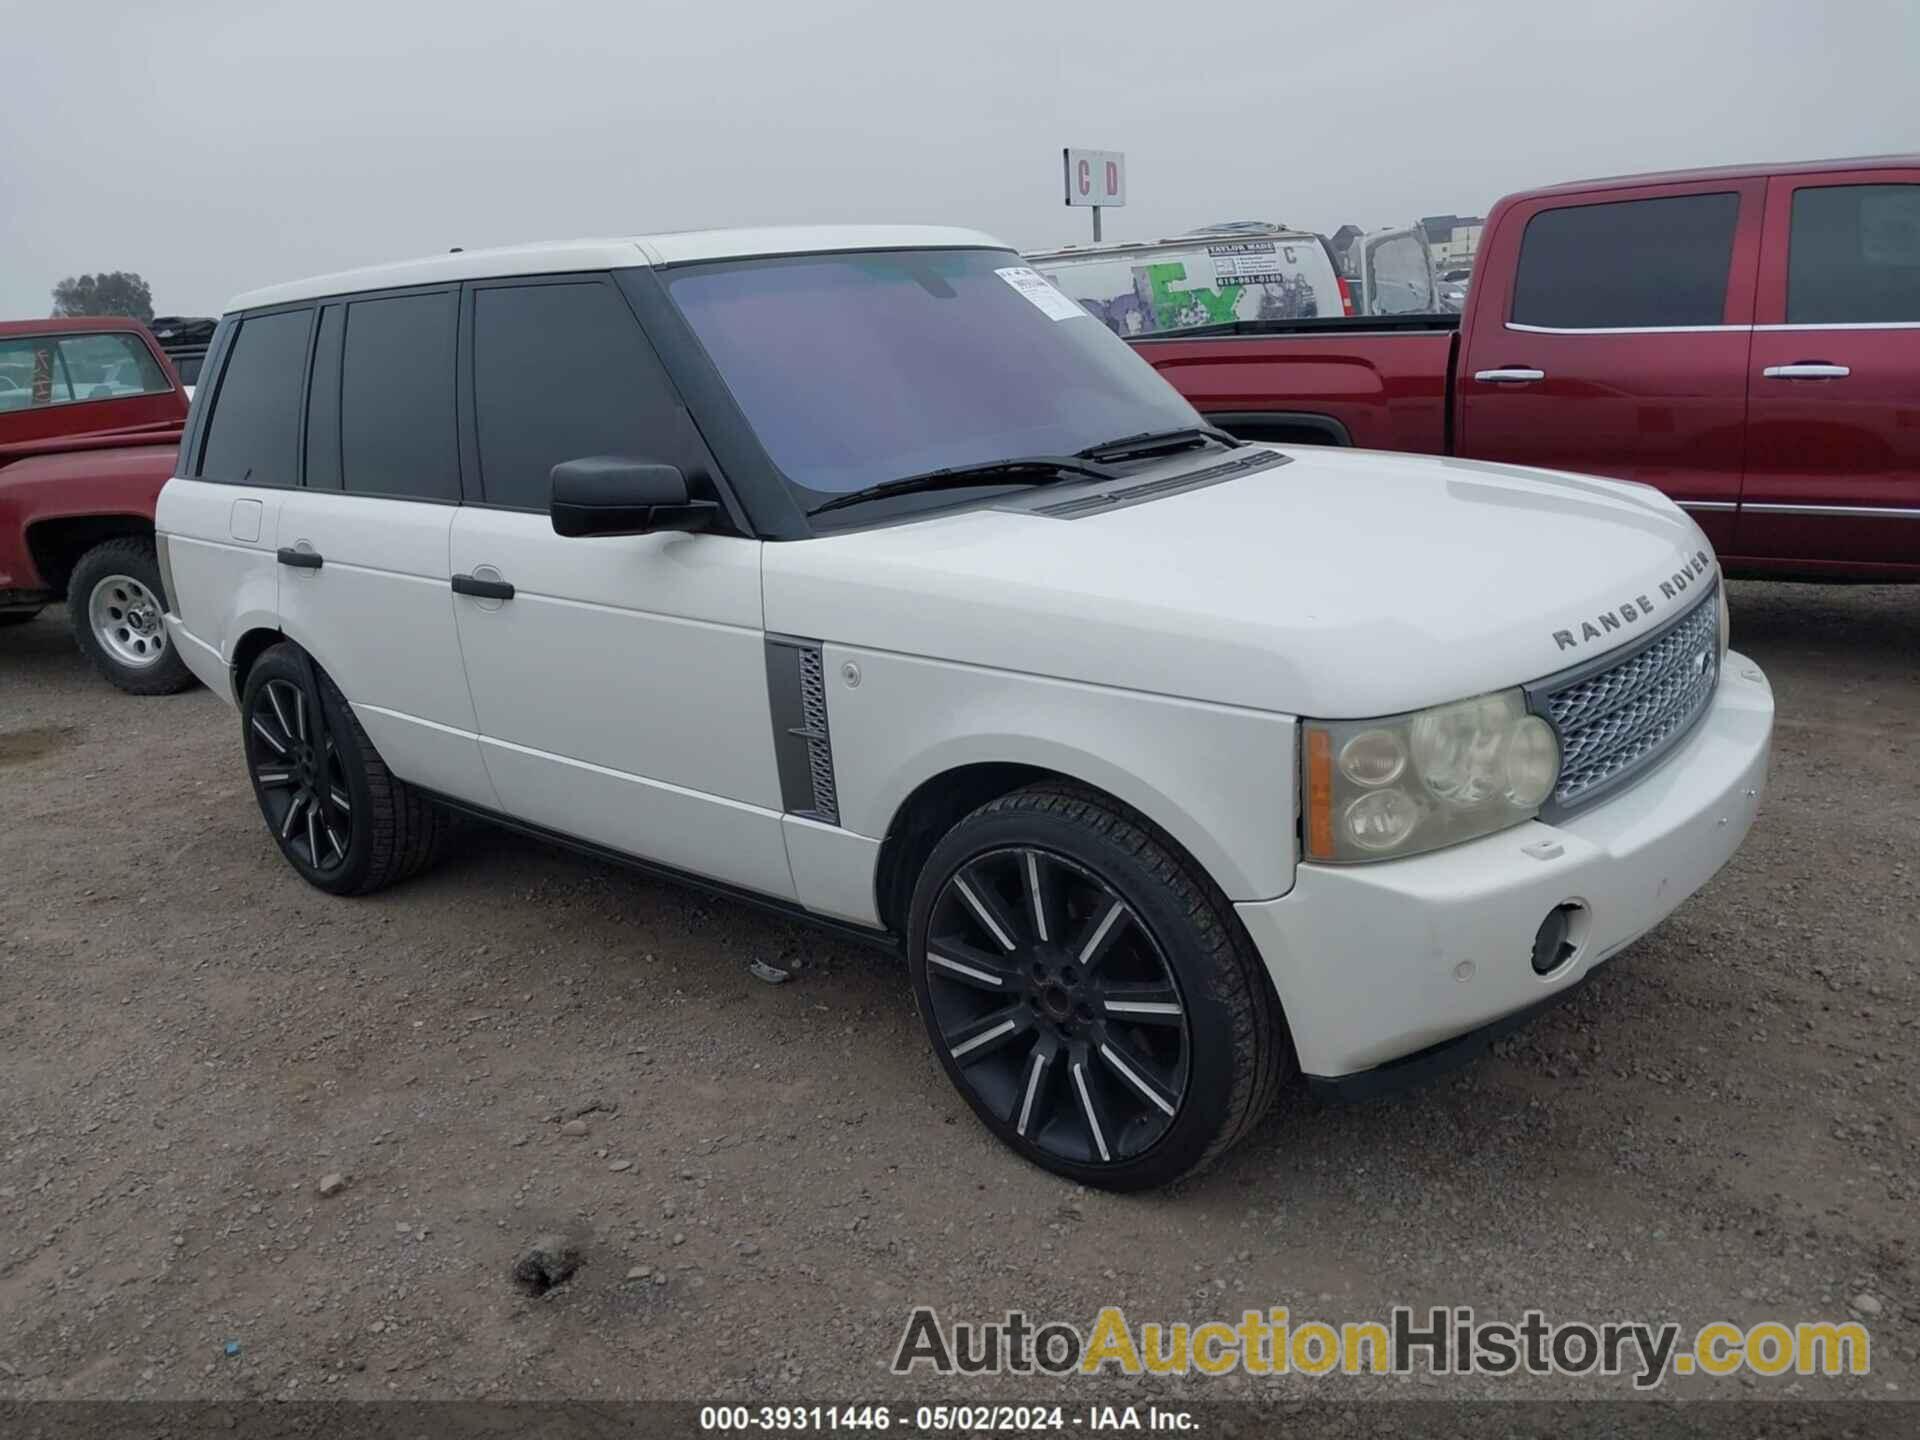 LAND ROVER RANGE ROVER SUPERCHARGED, SALMF13497A254291